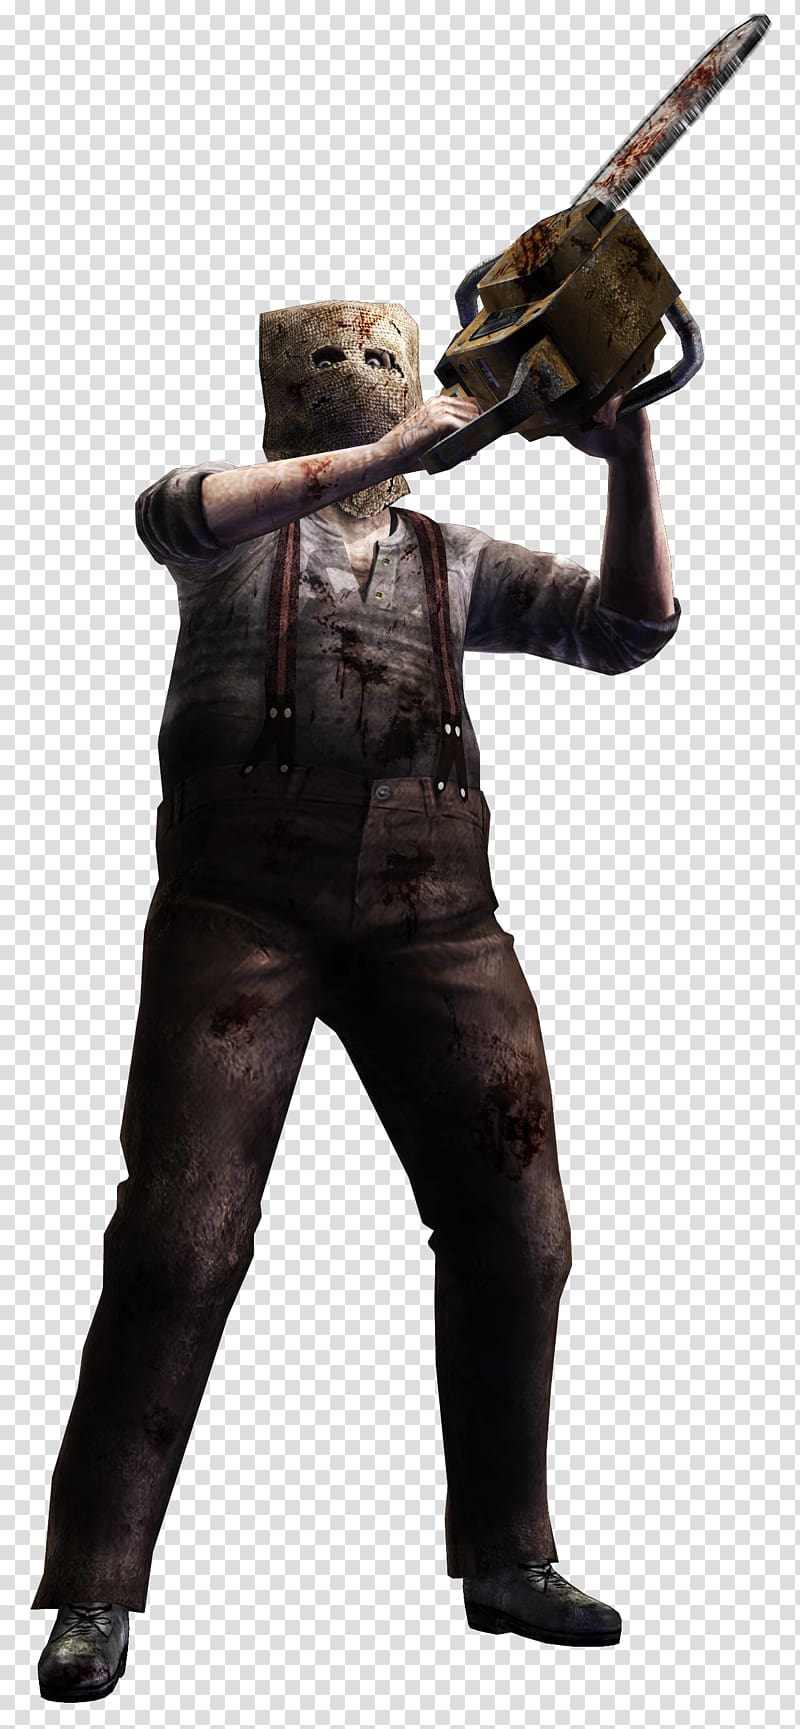 Resident Evil zombie character, Resident Evil 4 Resident Evil 3: Nemesis Resident Evil 2 Leon S. Kennedy, chainsaw transparent background PNG clipart